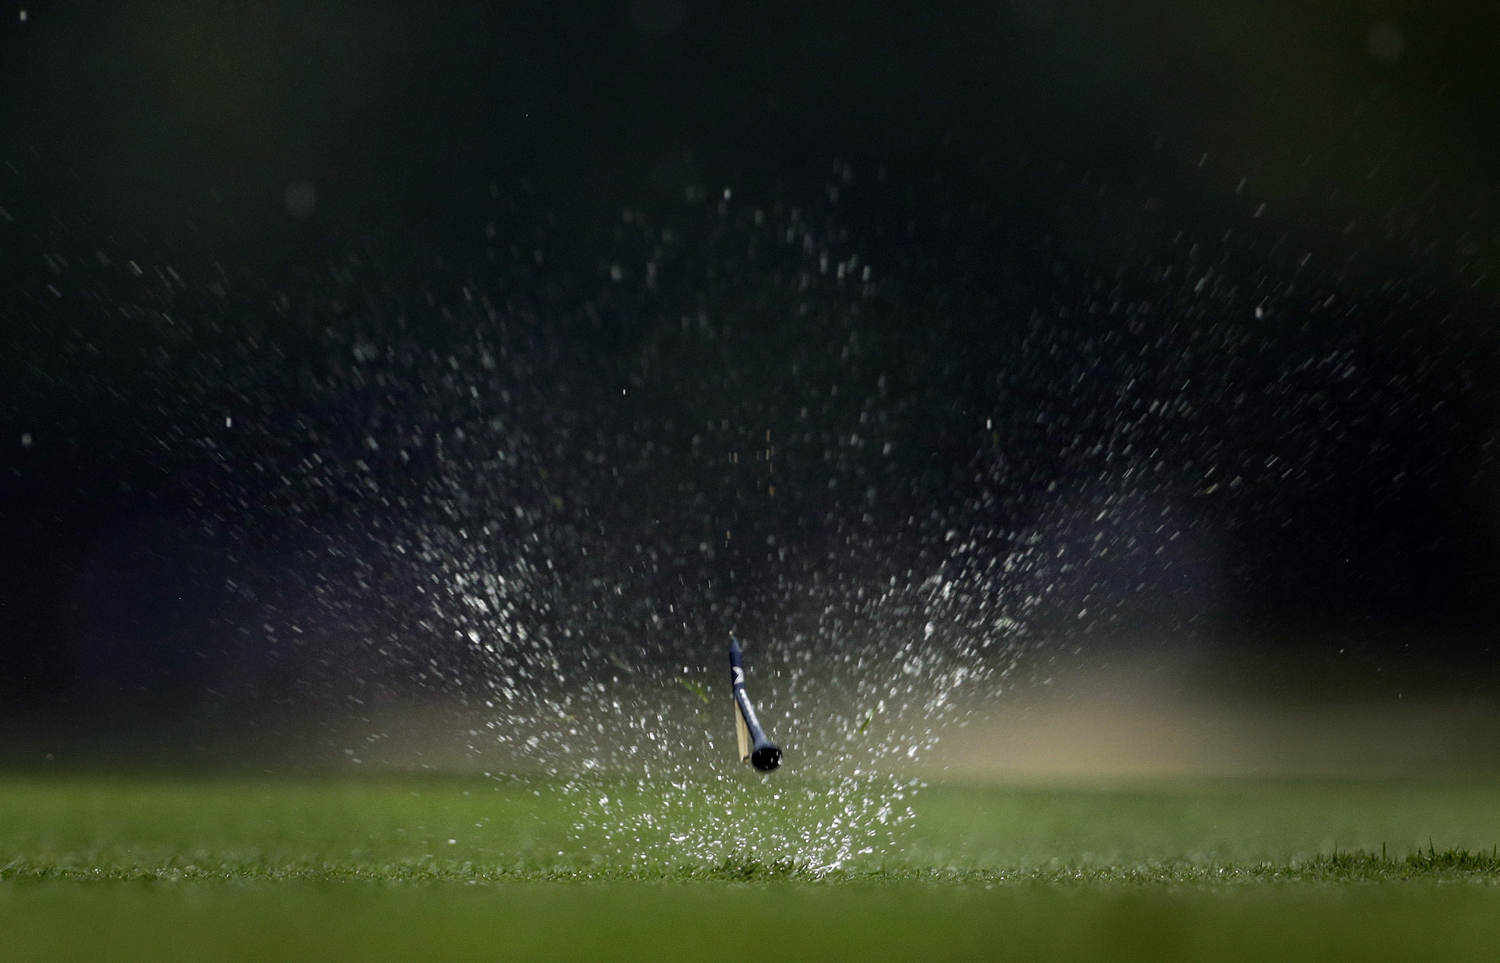 Aug. 8, 2014. Ryan Palmer's golf tee flies through the rain soaked grass on the 12th hole during the second round of the PGA Championship golf tournament at Valhalla Golf Club in Louisville, Ky.